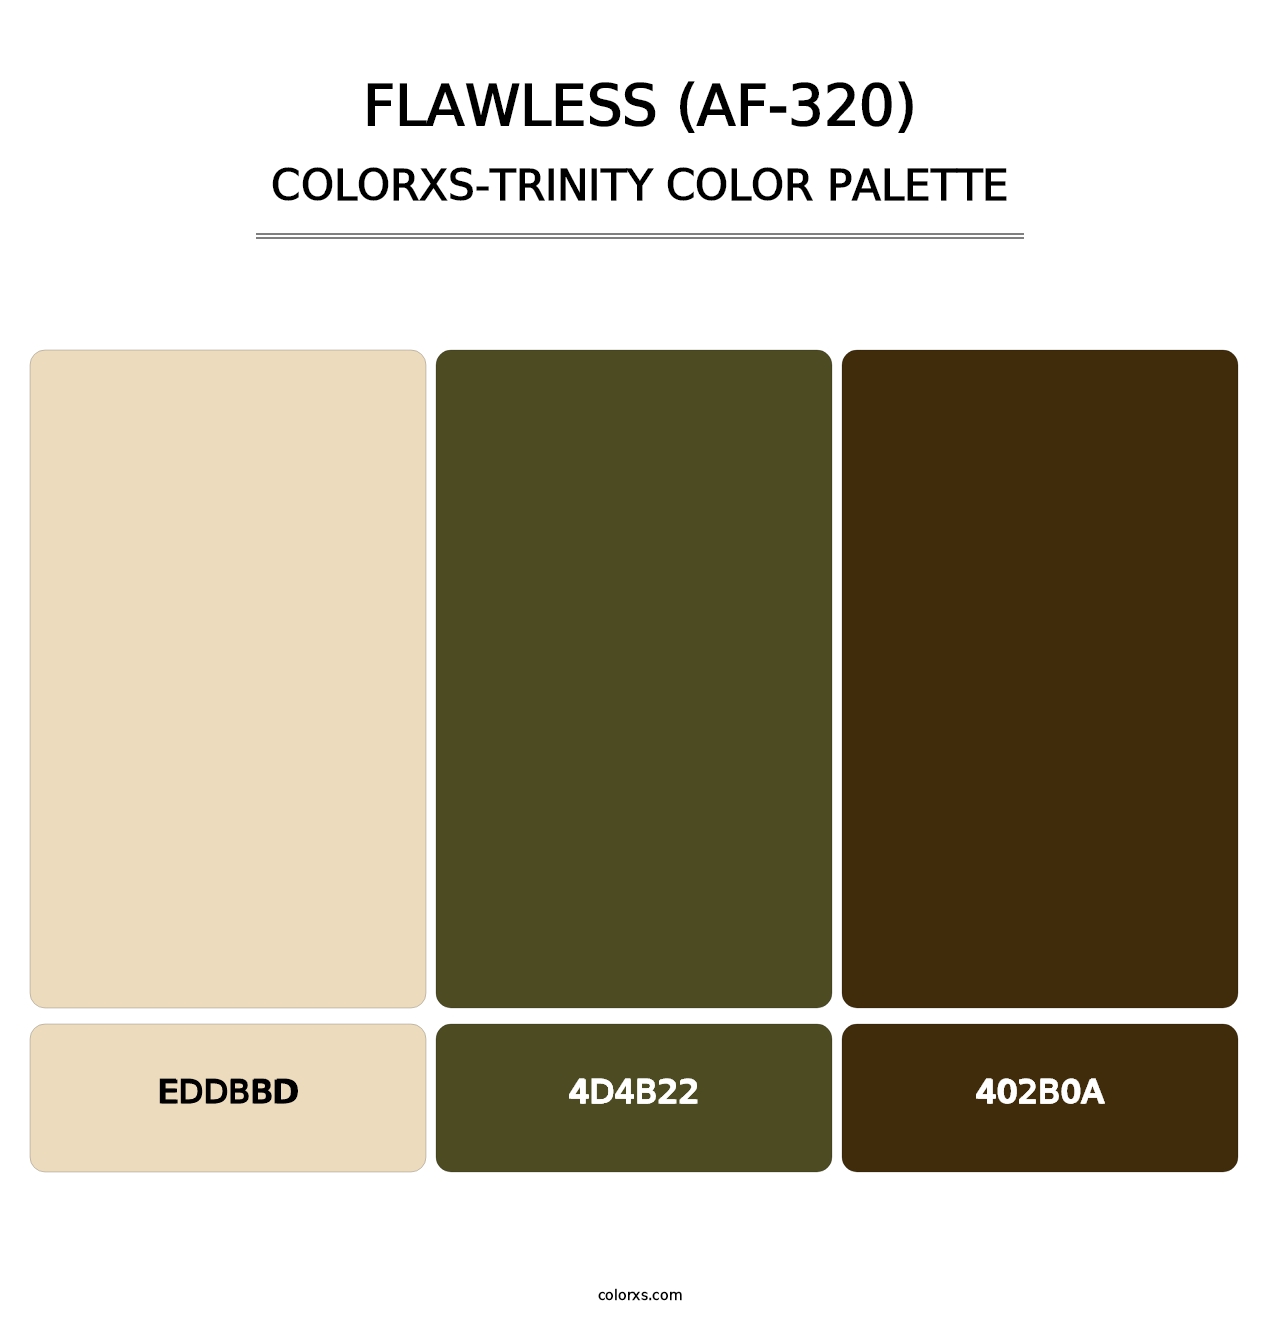 Flawless (AF-320) - Colorxs Trinity Palette